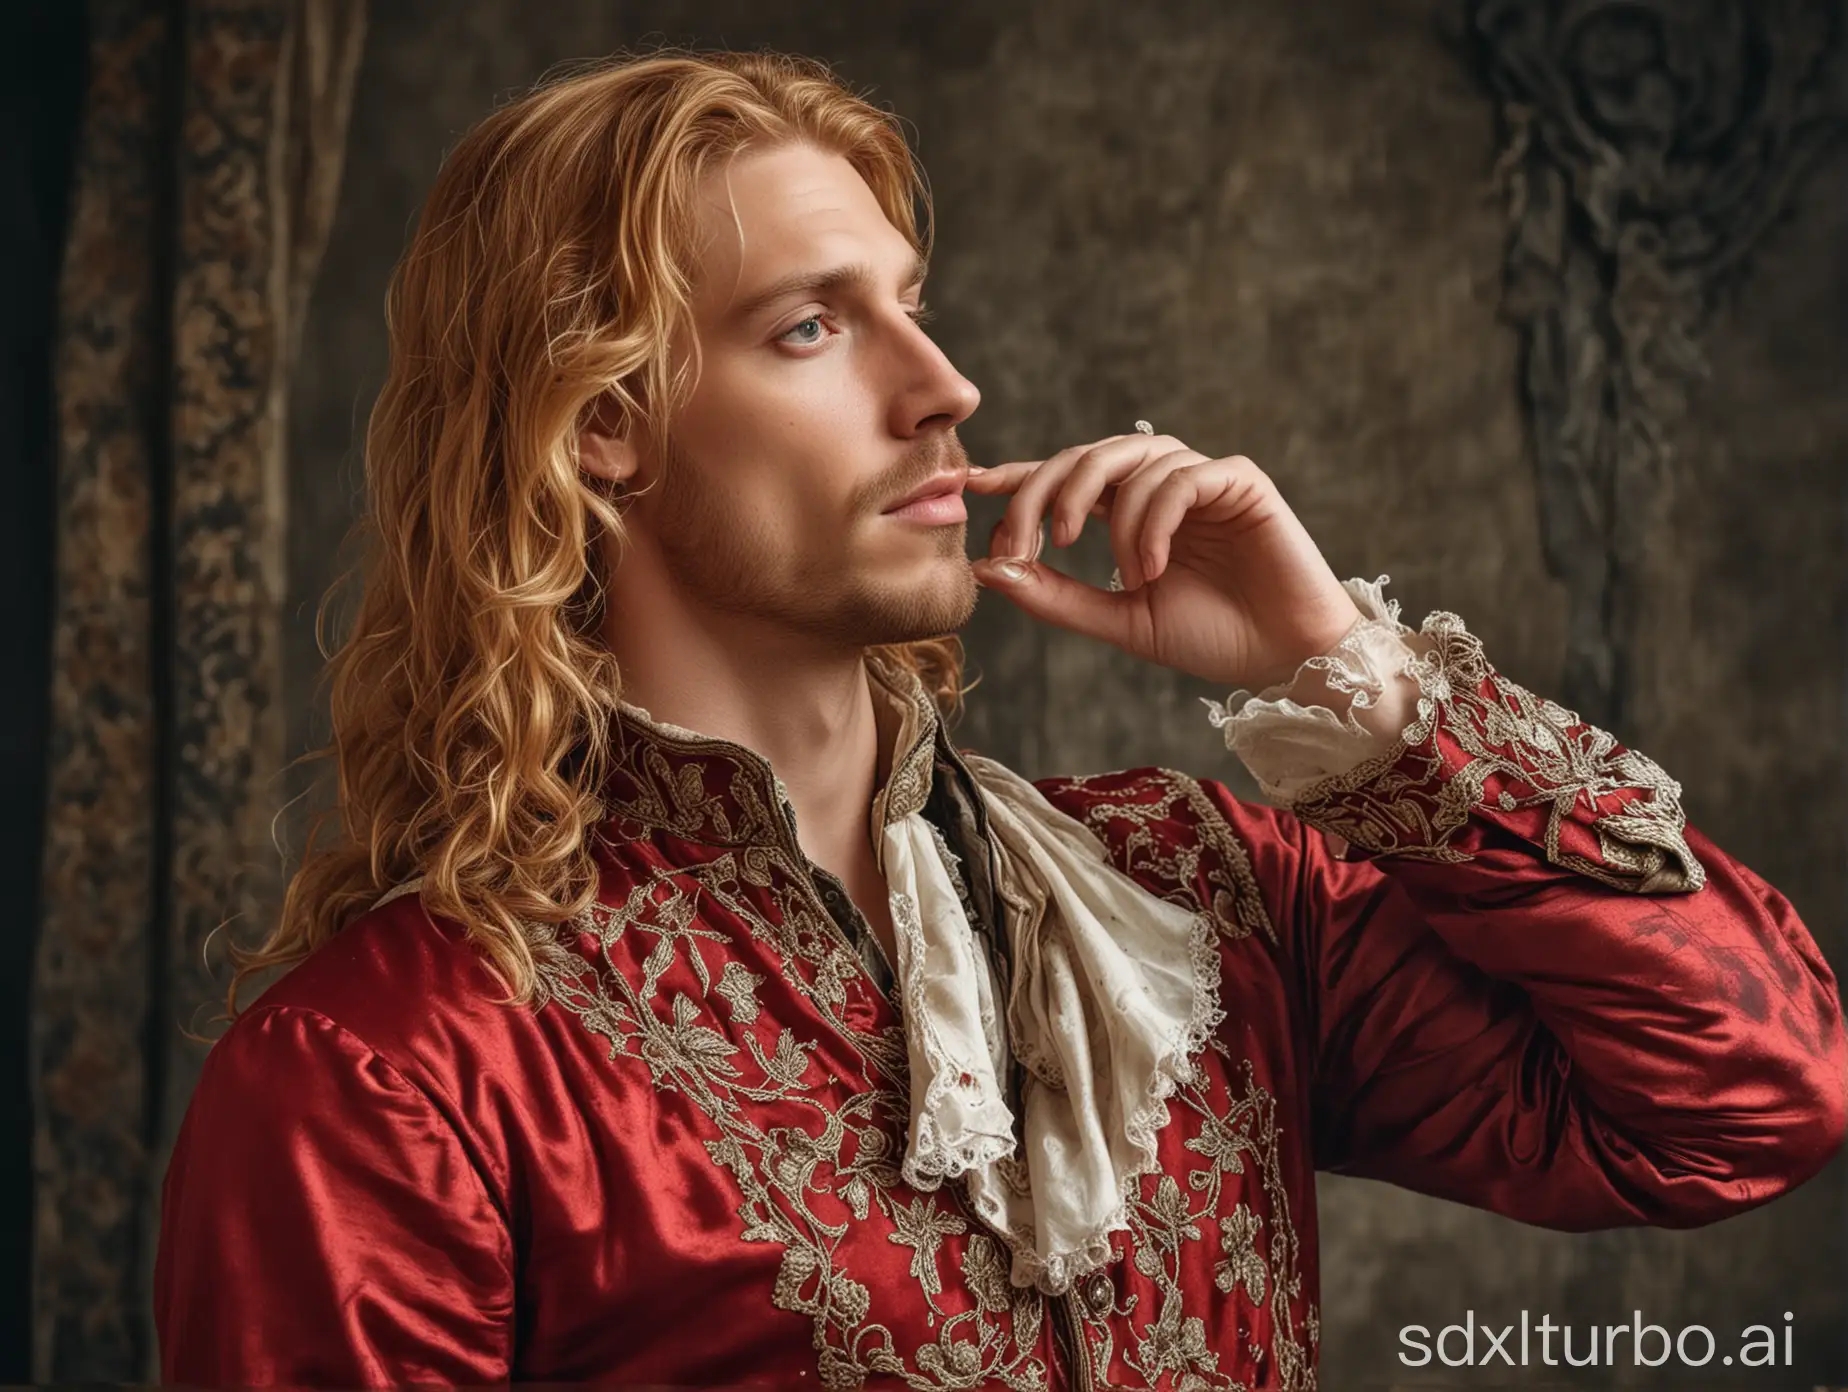 A handsome blman of about thirty-five with a long a bit wavy blond hair in a rich medieval costume stands half sideways with his hand in front of his face and his head up. A red-haired beauty with a perfect figure in a luxurious dress wipes the blood from his face with a lace bloodstained handkerchief.